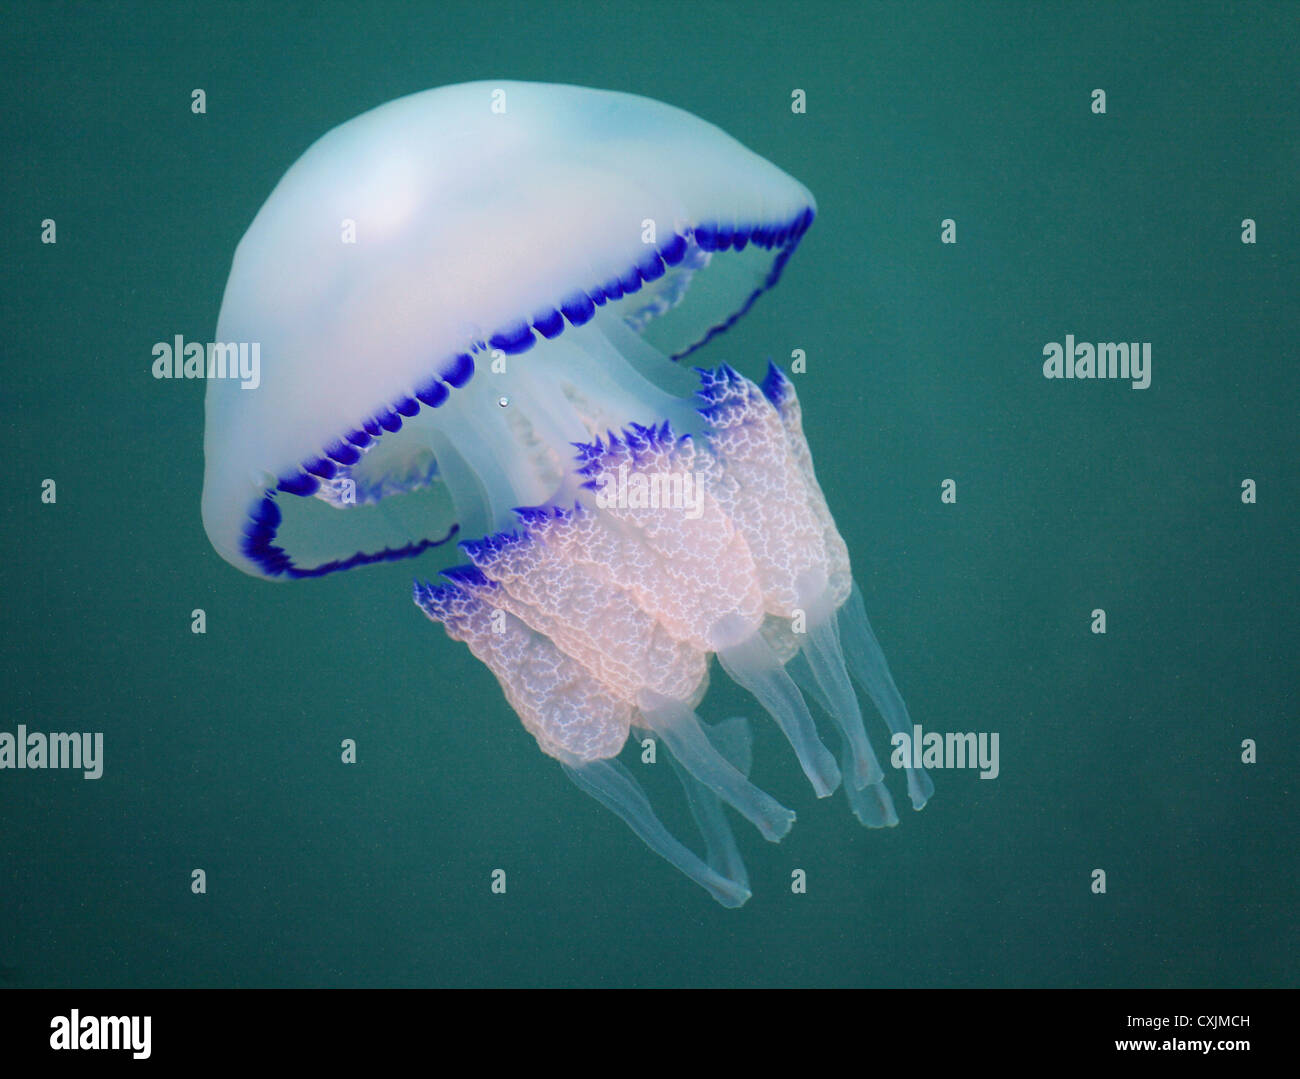 Large floating blue jellyfish in green water Stock Photo